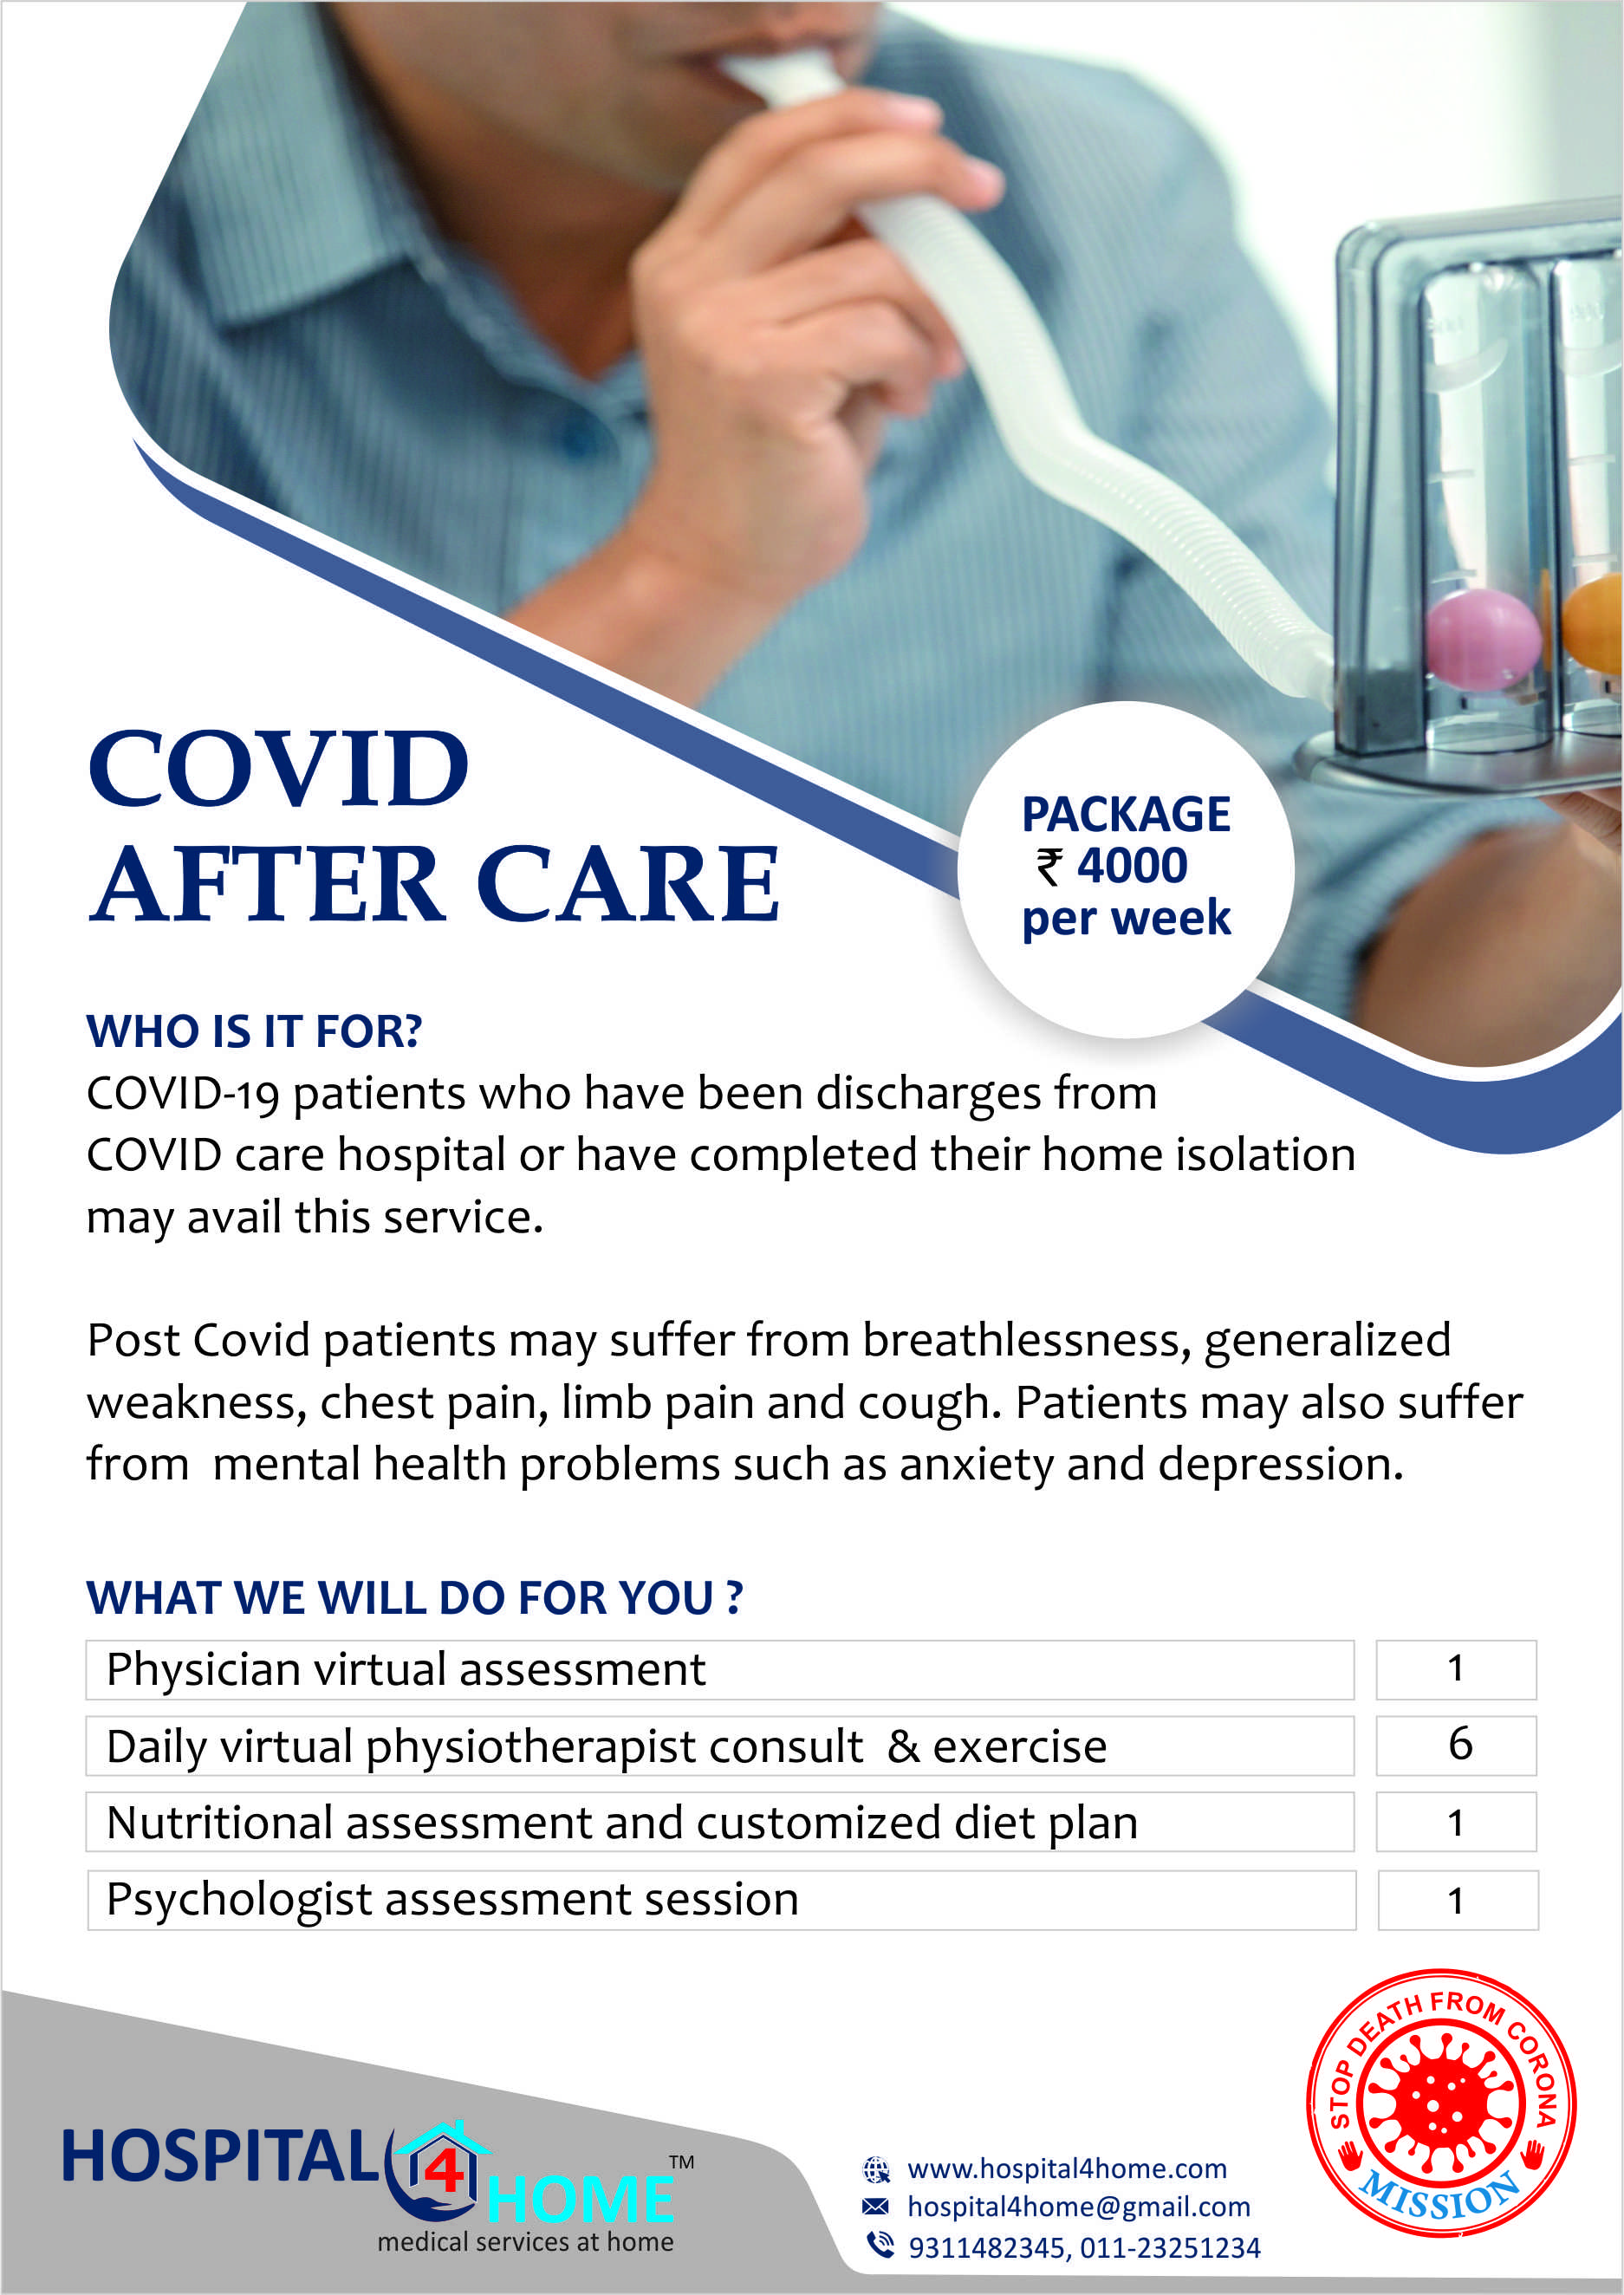 COVID AFTER CARE